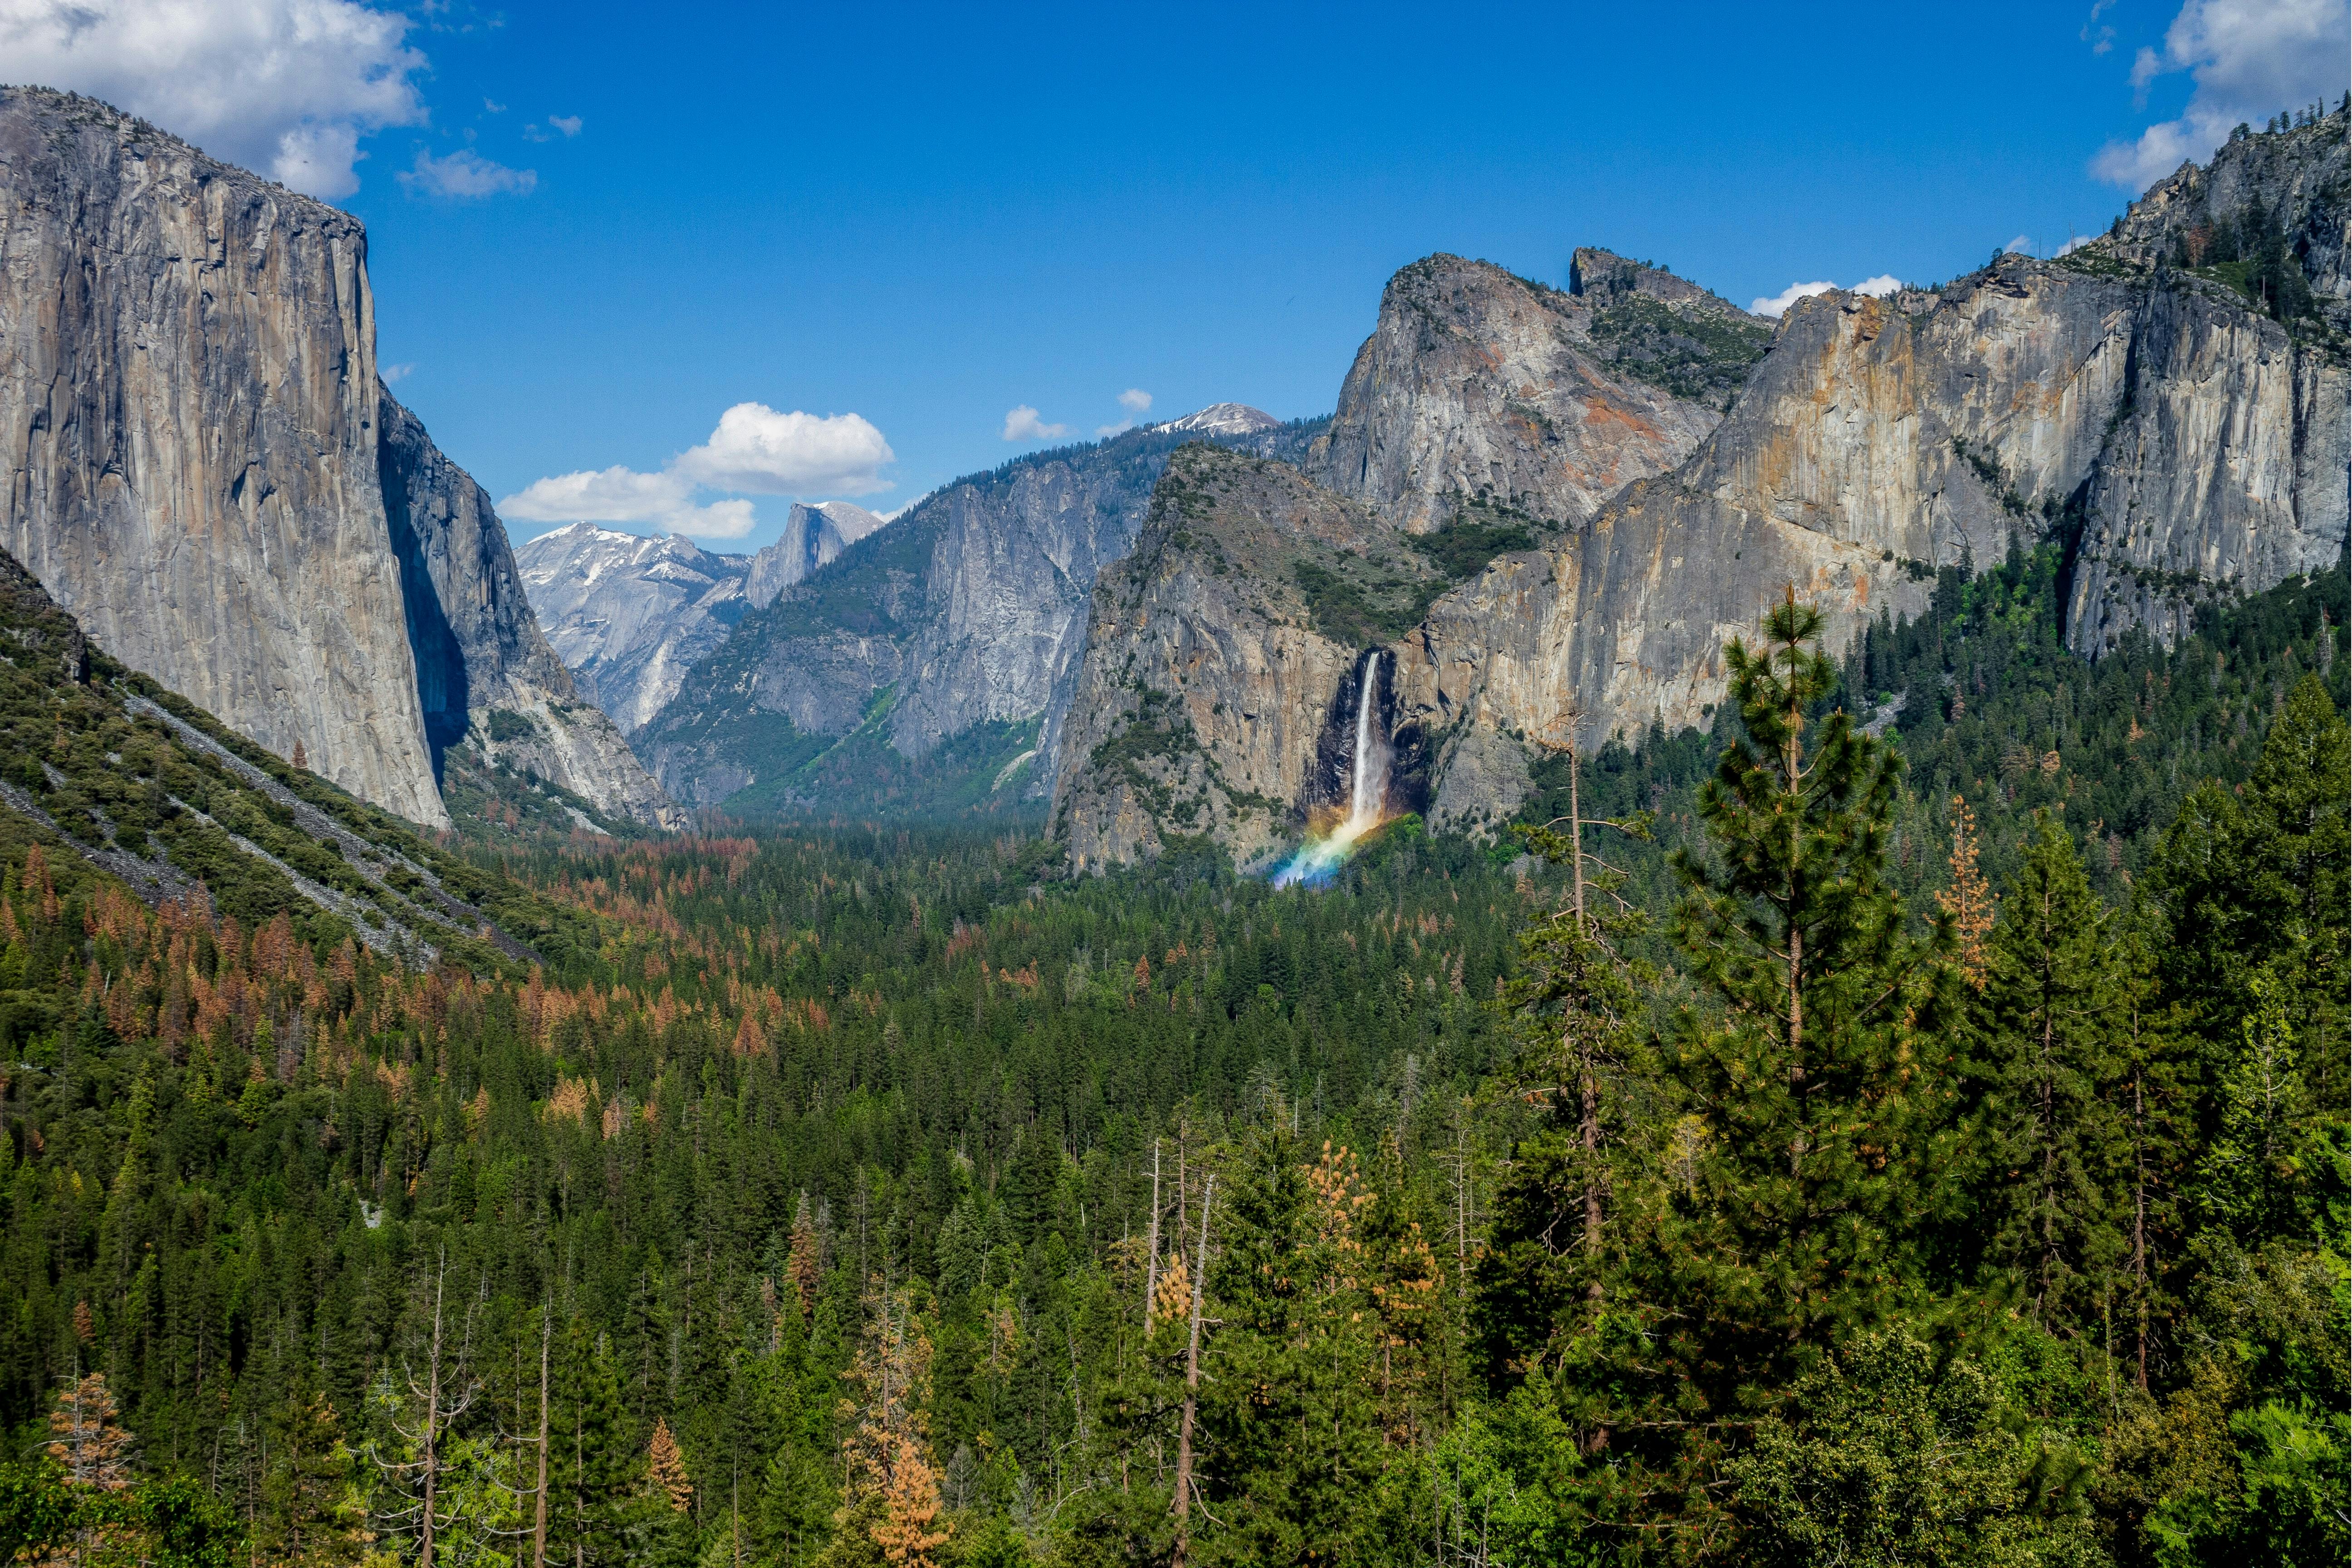 Guided tour to Yosemite and Giant Sequoias from San Francisco Musement